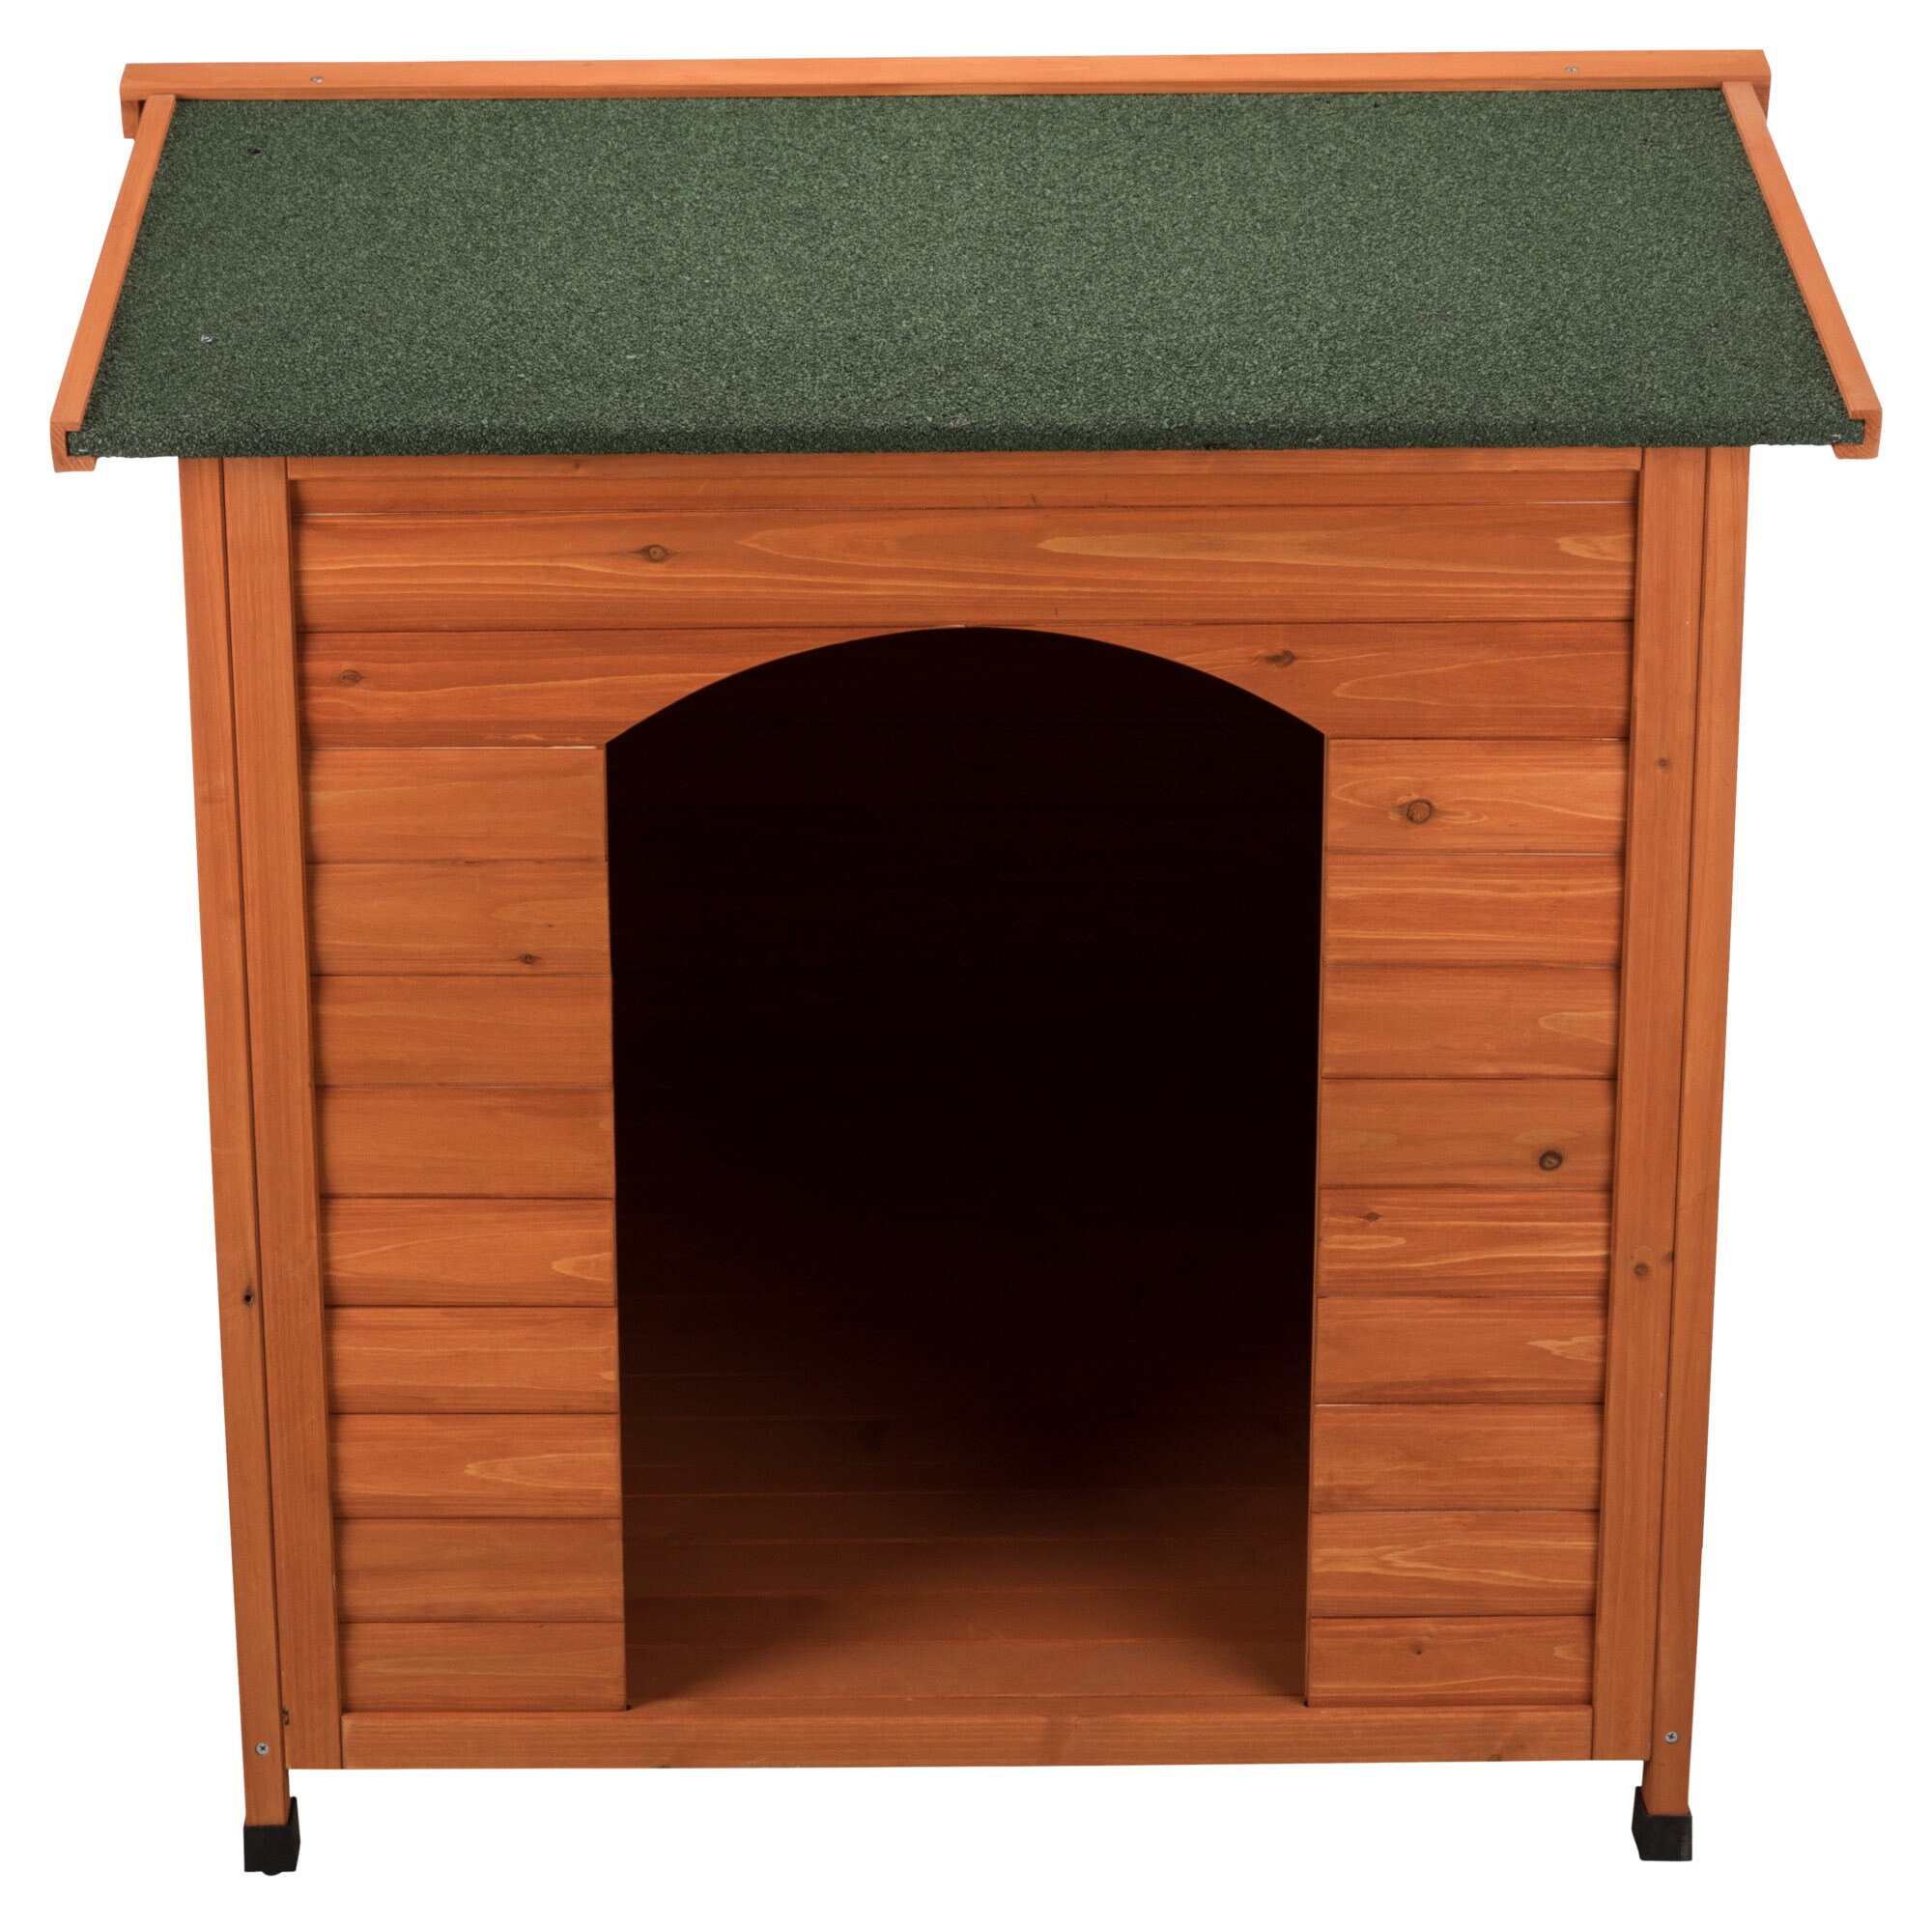 39553 TRIXIE Pet Products Dog Club House for Large/XL Breed Dogs in Glazed Pine 